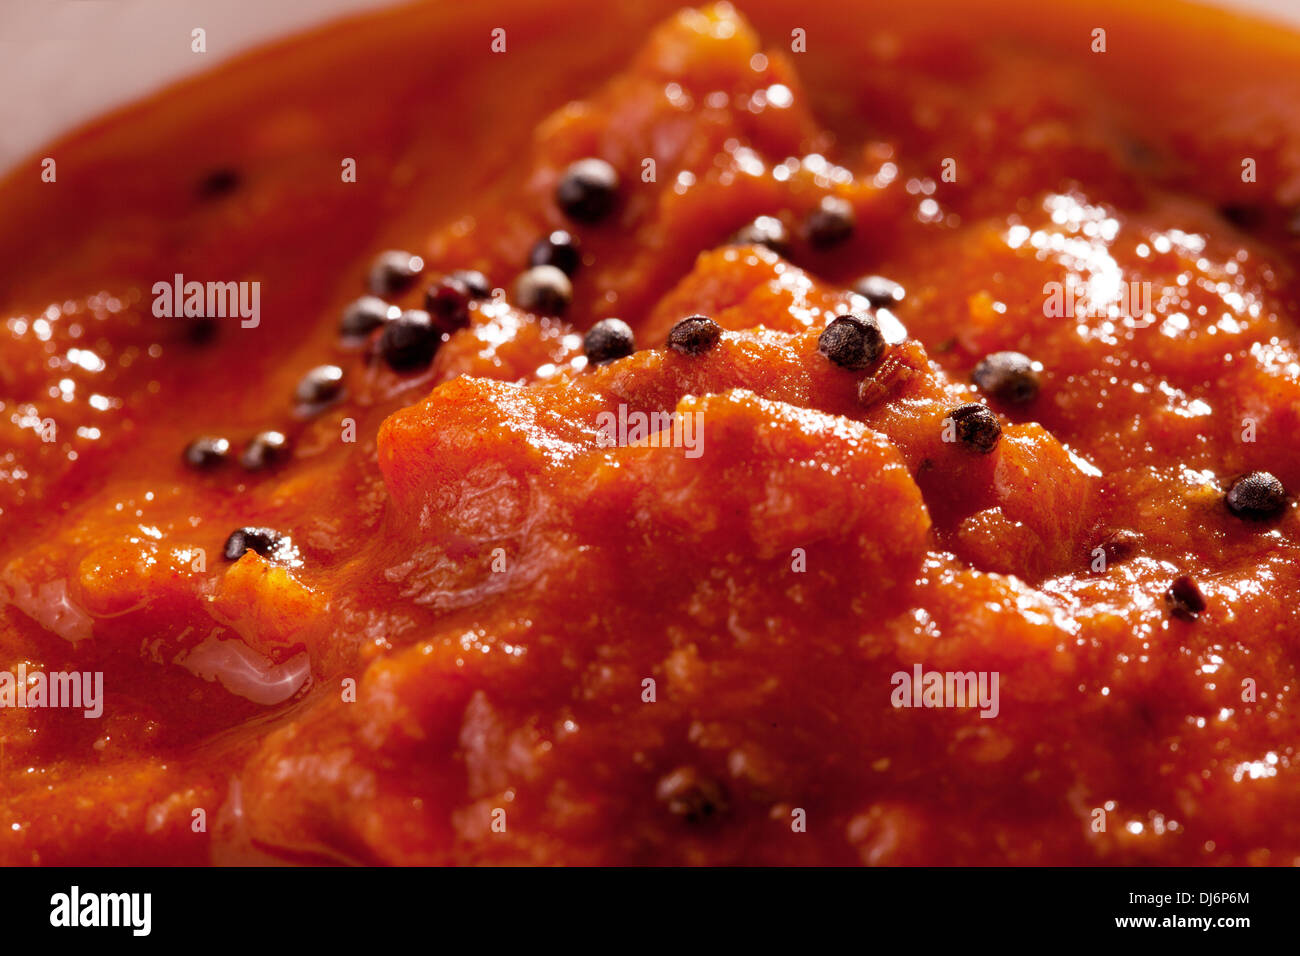 Tomato Chutney - Tomato Chutney is a popular side dish from South ...